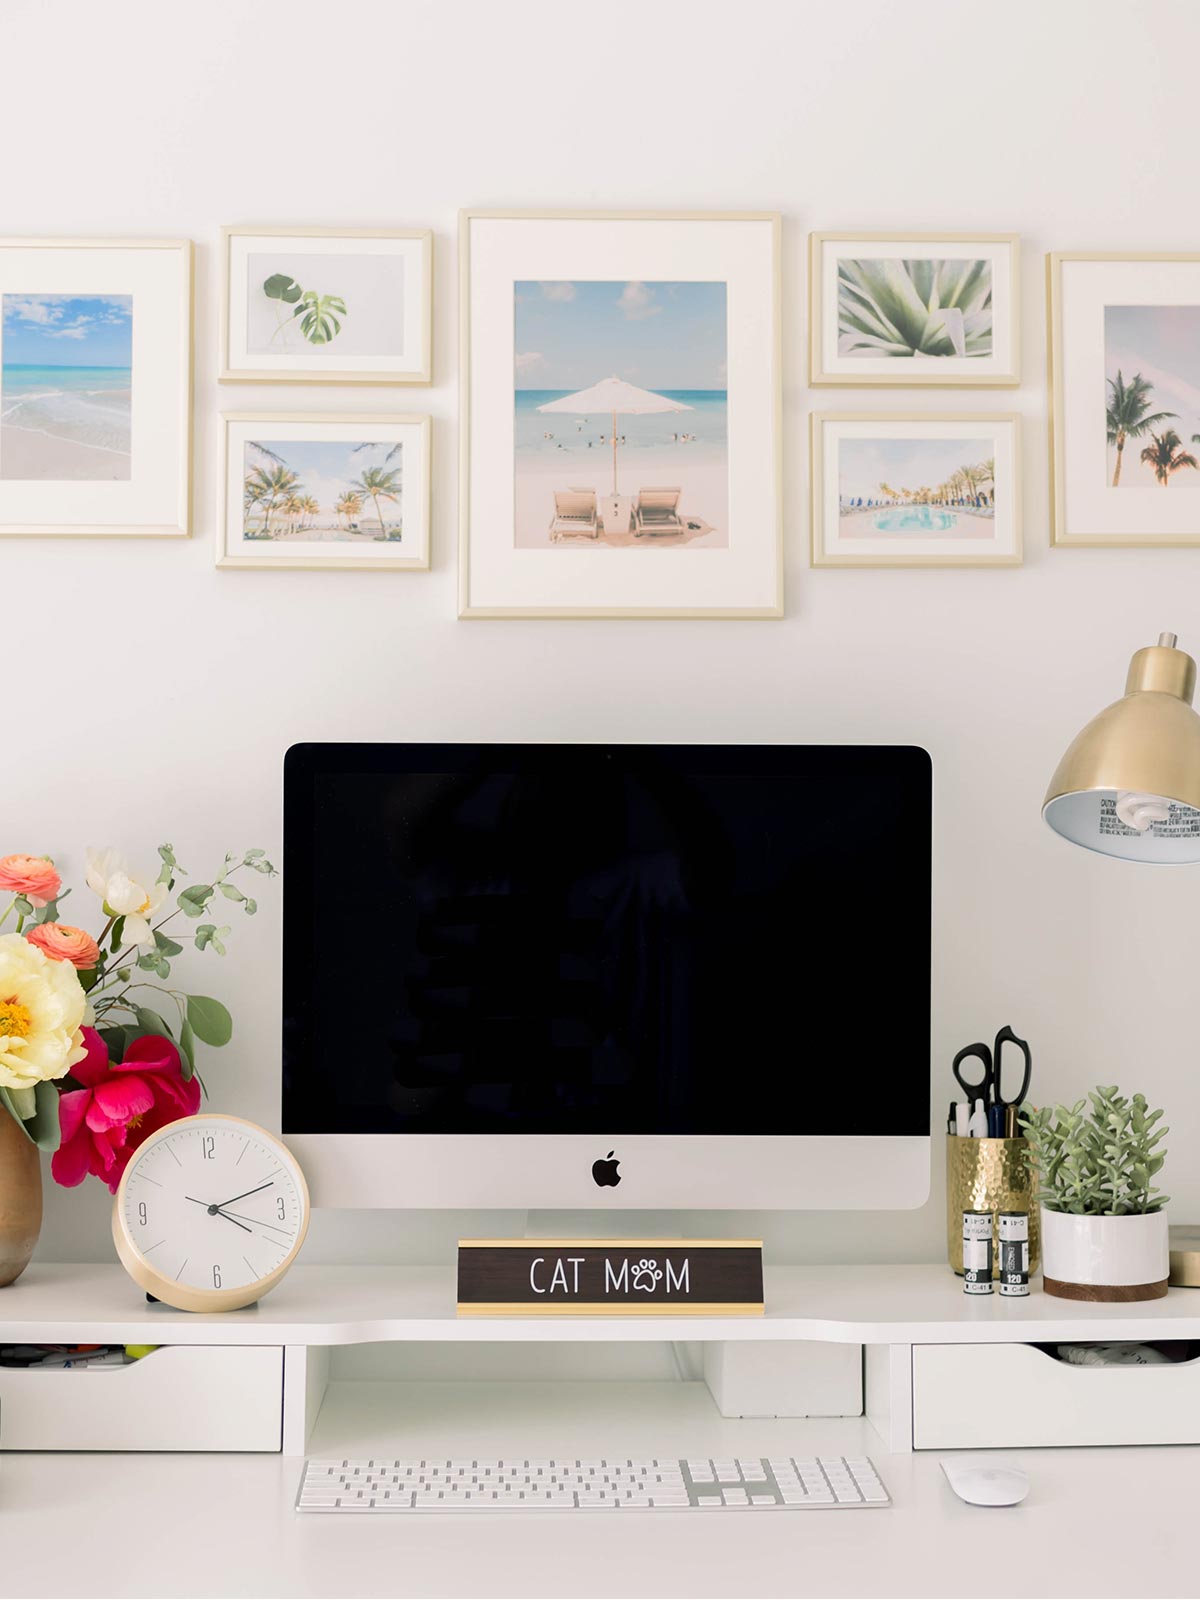 Gallery wall of frames above a desk with a computer, lamp, and bright bouquet.